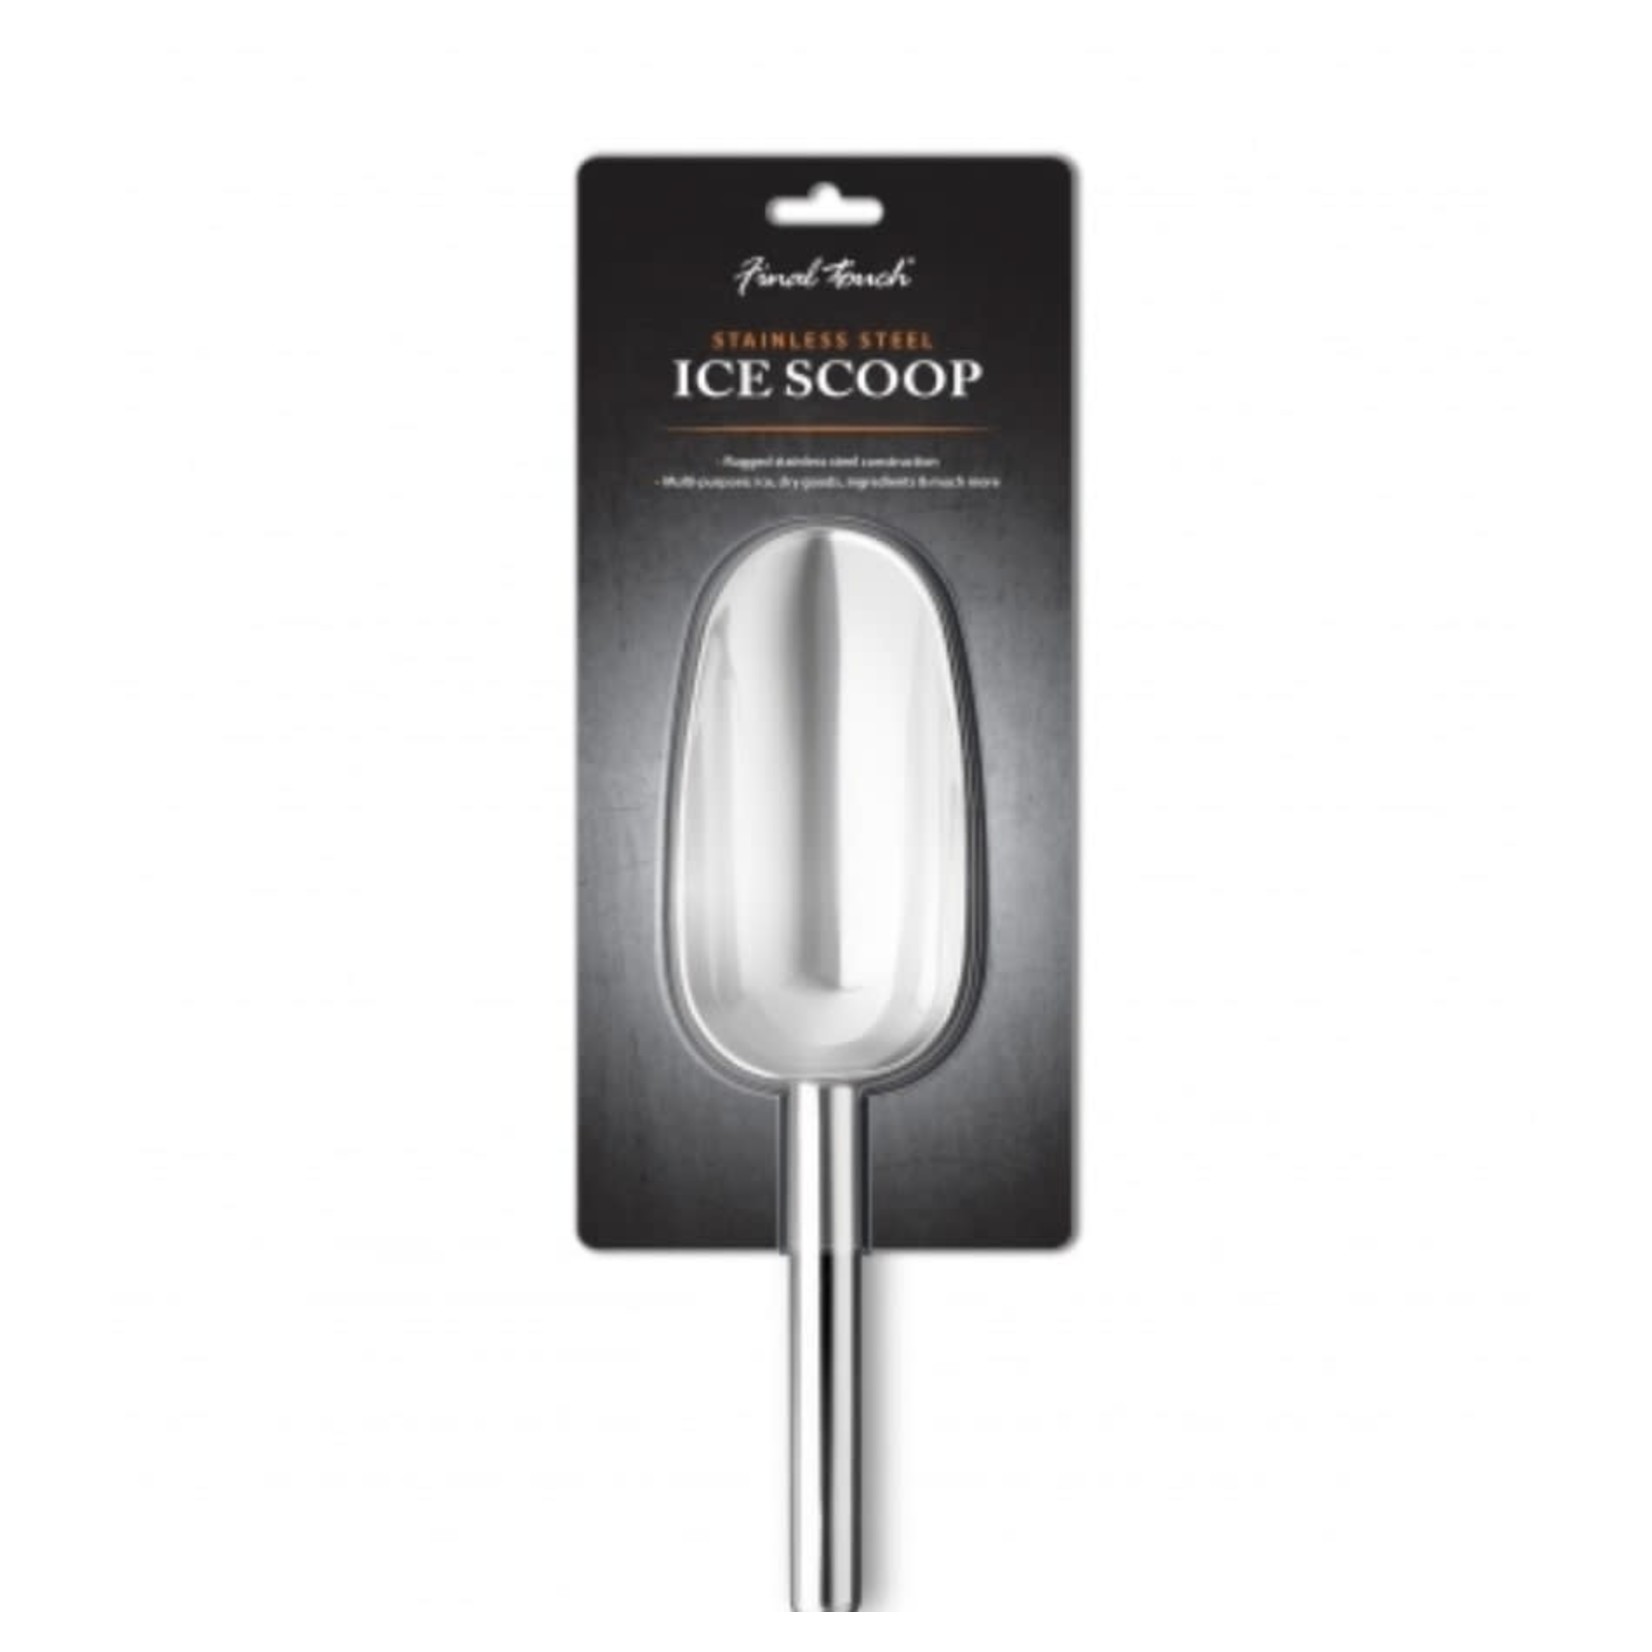 FINAL TOUCH FINAL TOUCH Ice Scoop - Stainless